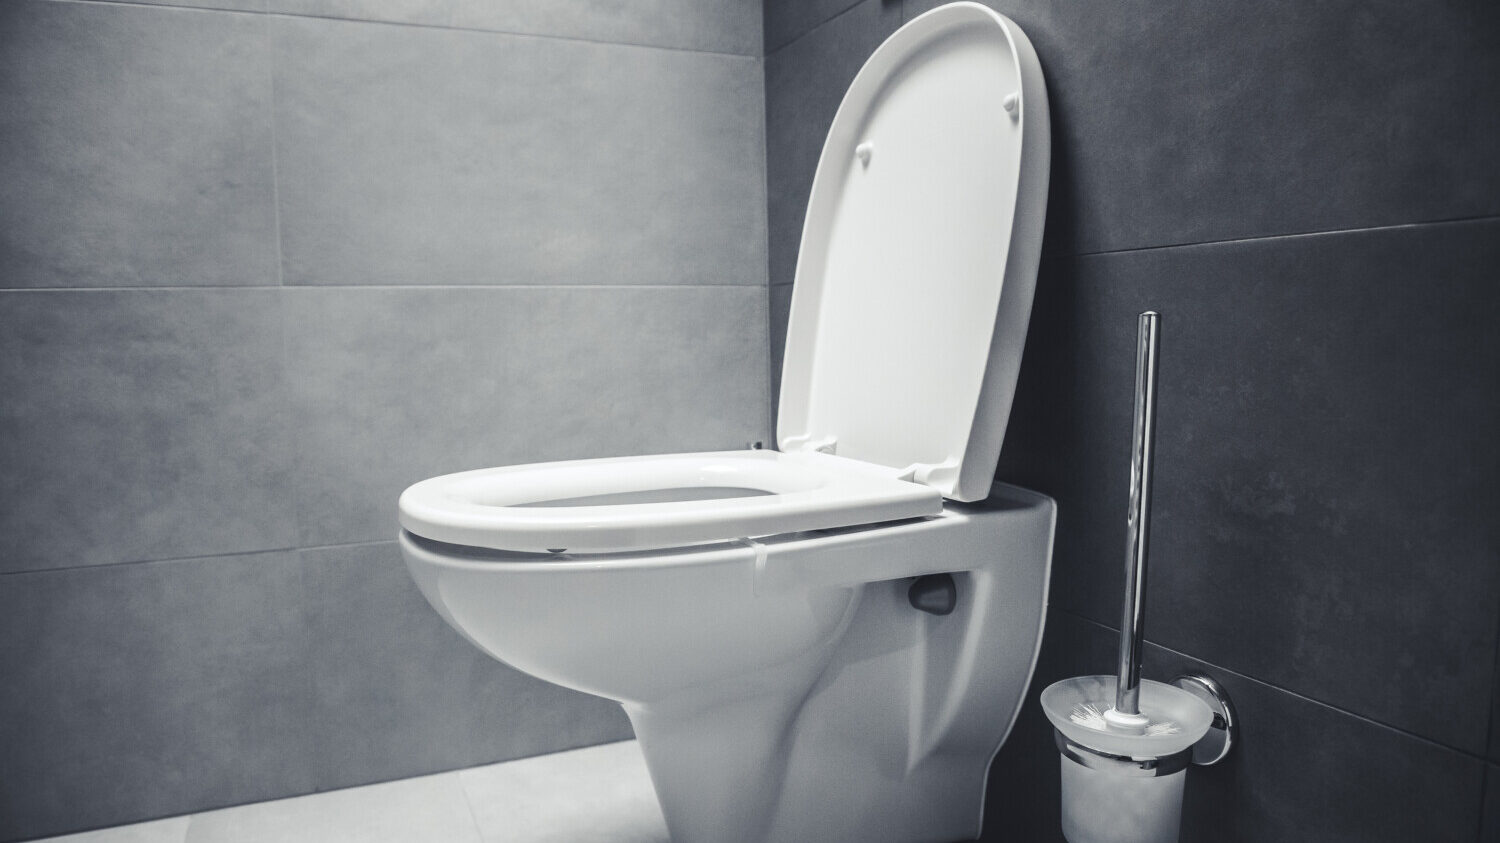 These innovative toilets can raise and lower their own seats